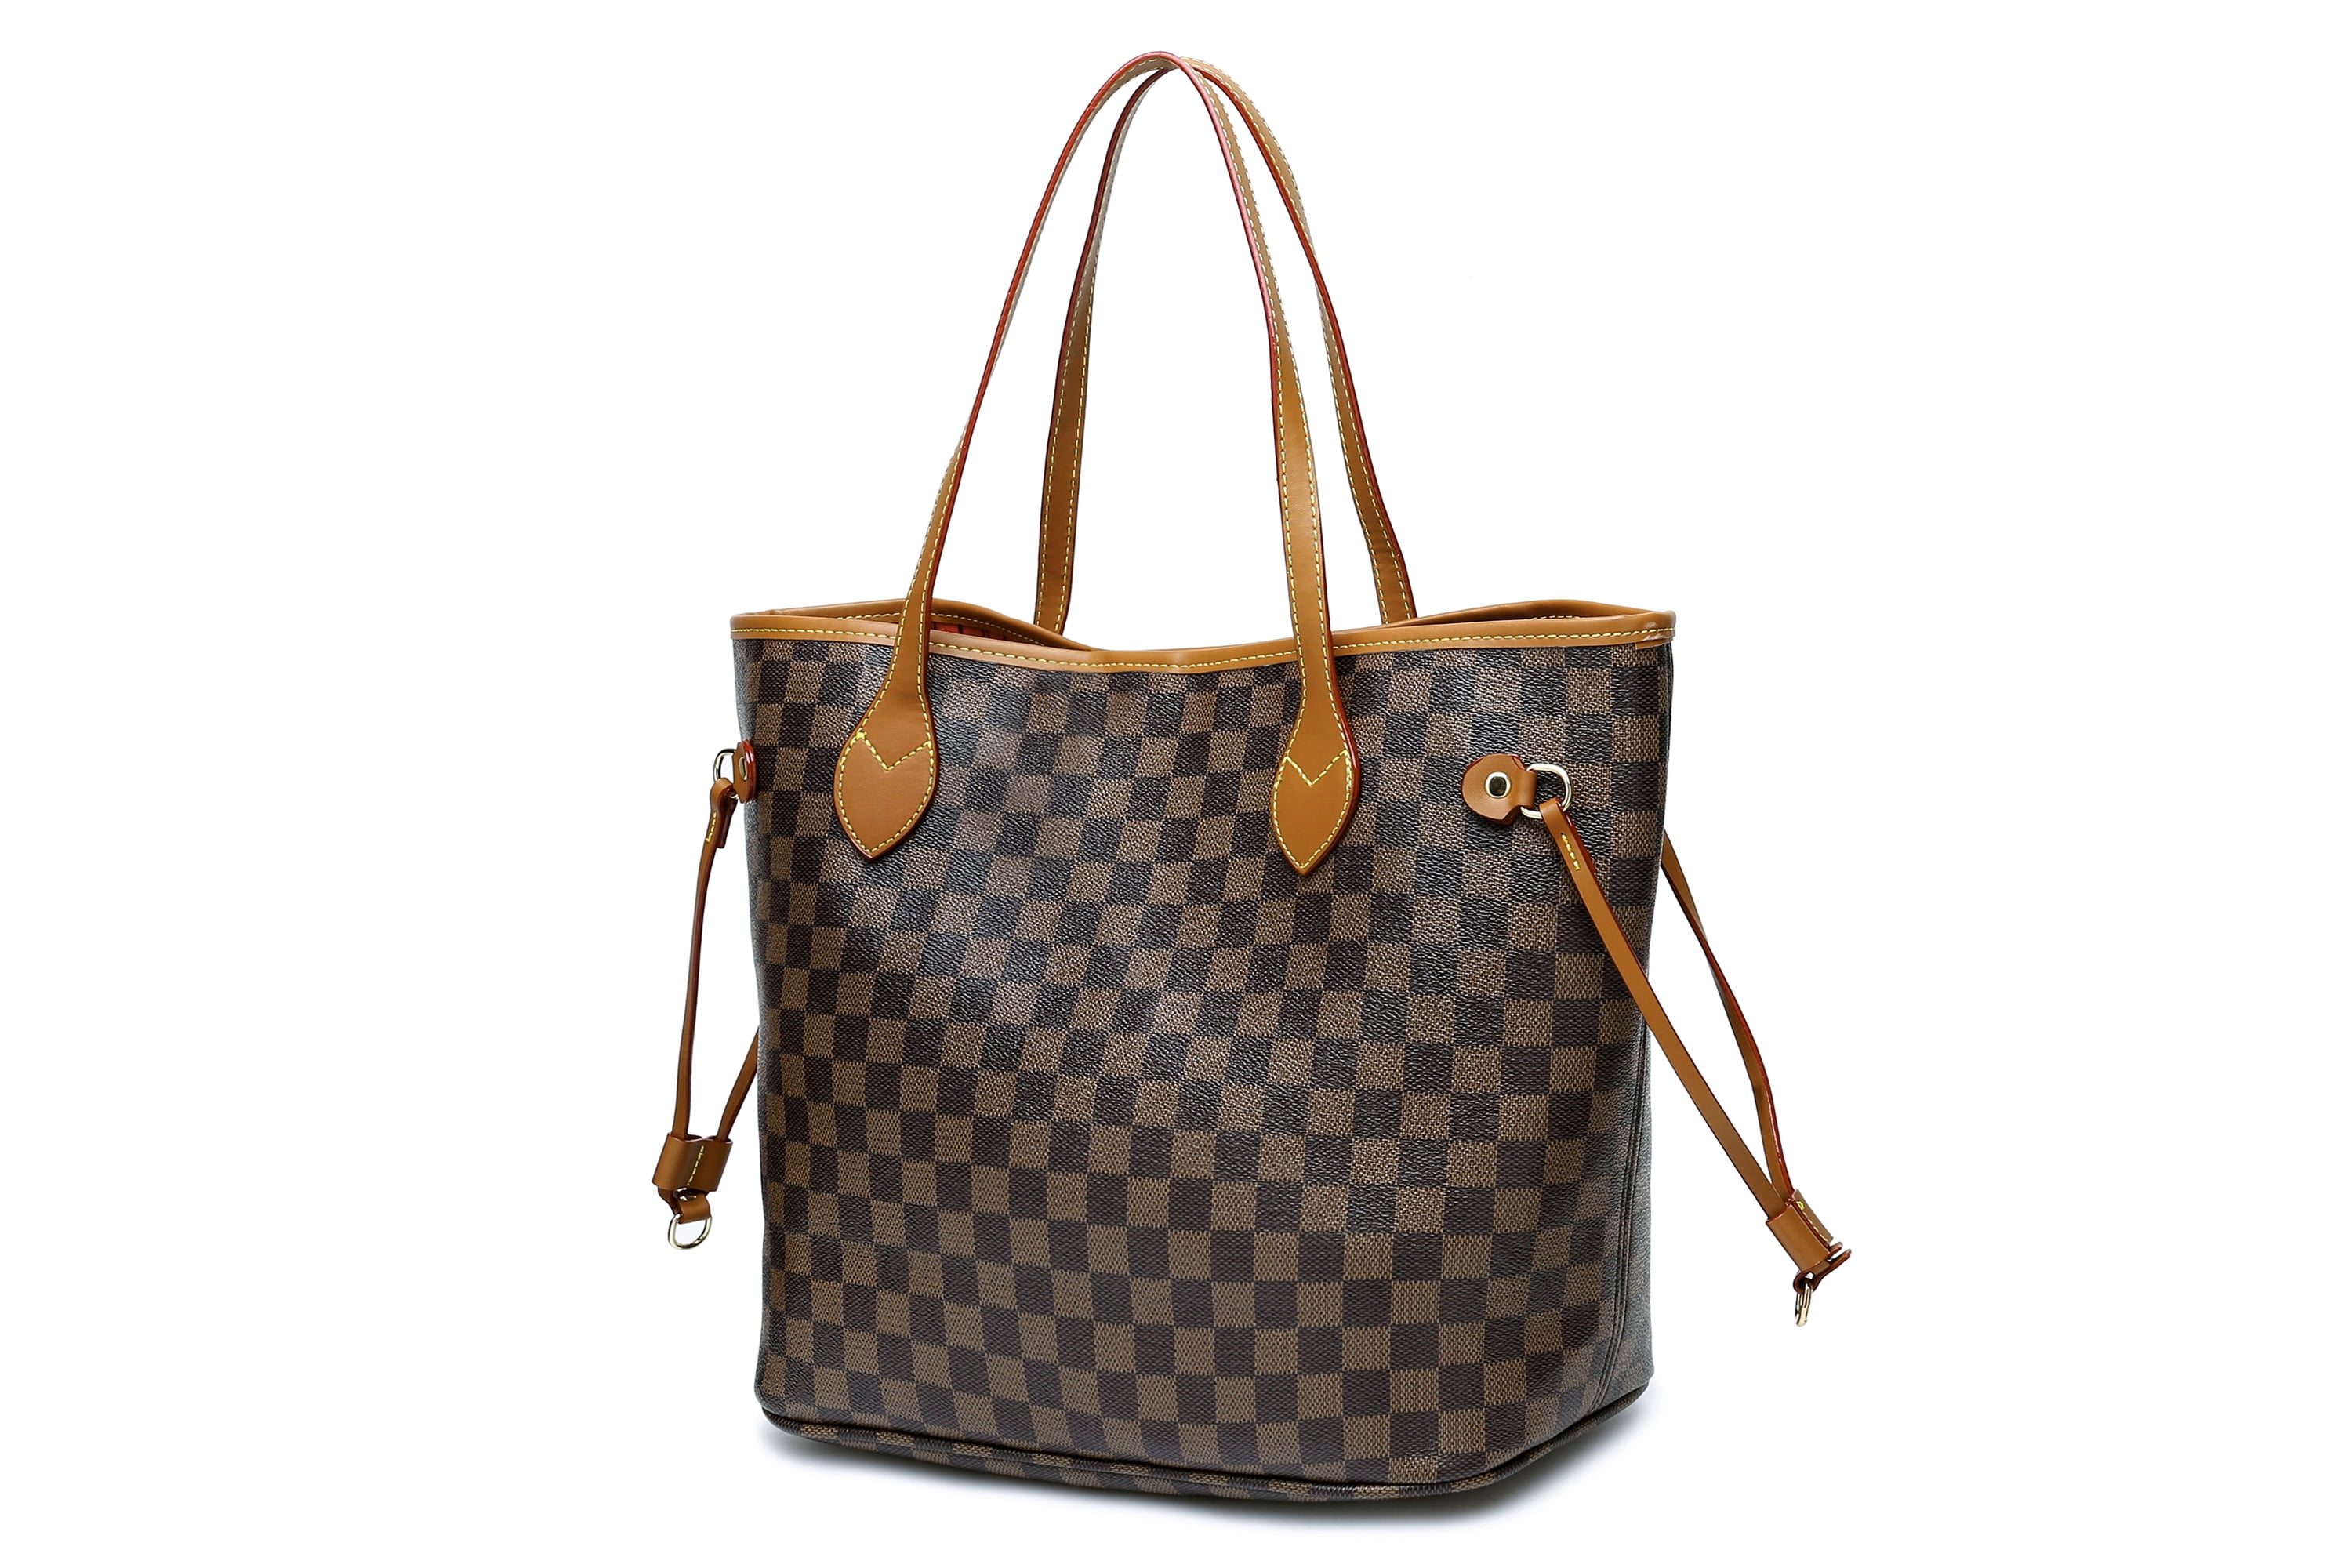 Checkered Tote Shoulder Bag Crossbody Bags for Women PU Vegan Leather